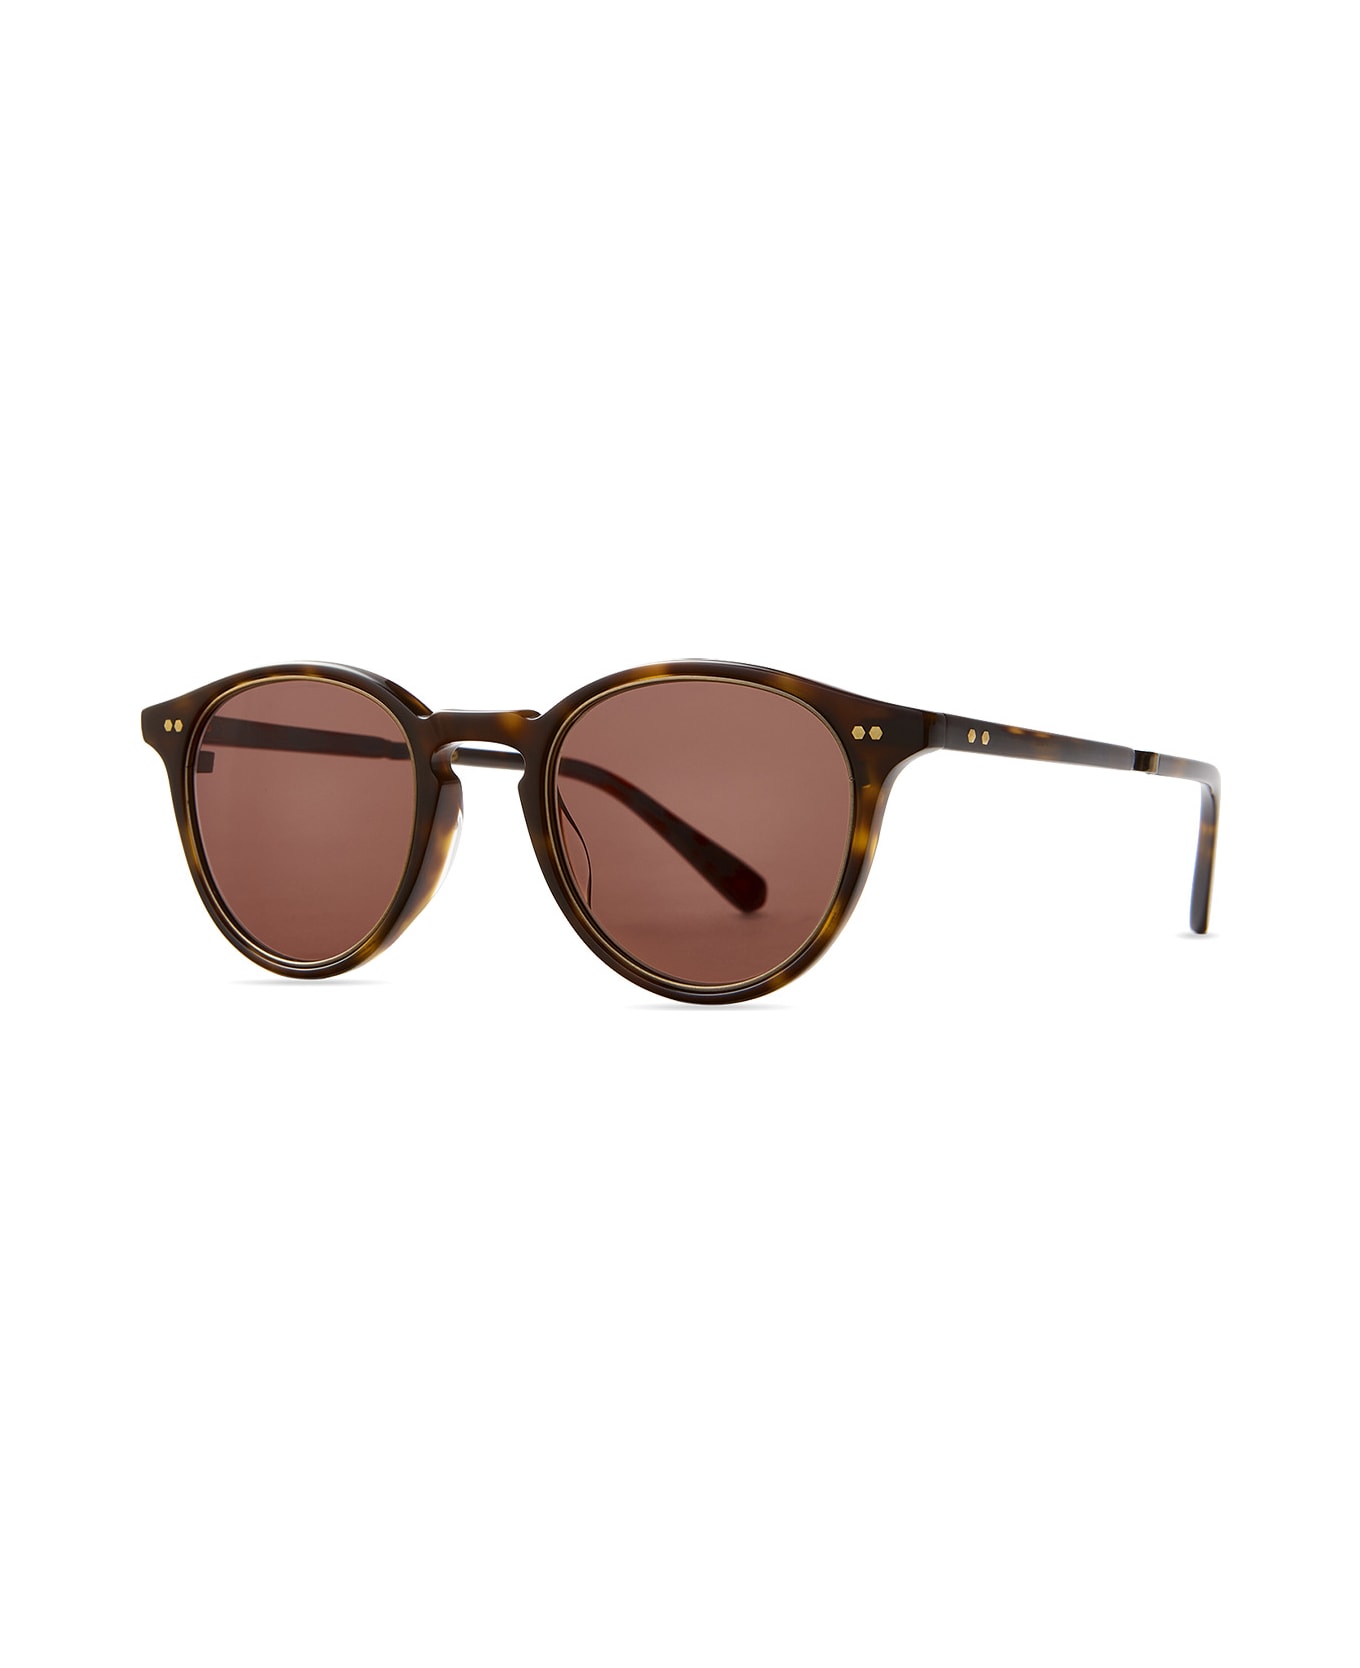 Mr. Leight Marmont Ii S Hickory Tortoise-antique Gold Sunglasses - Hickory Tortoise-Antique Gold